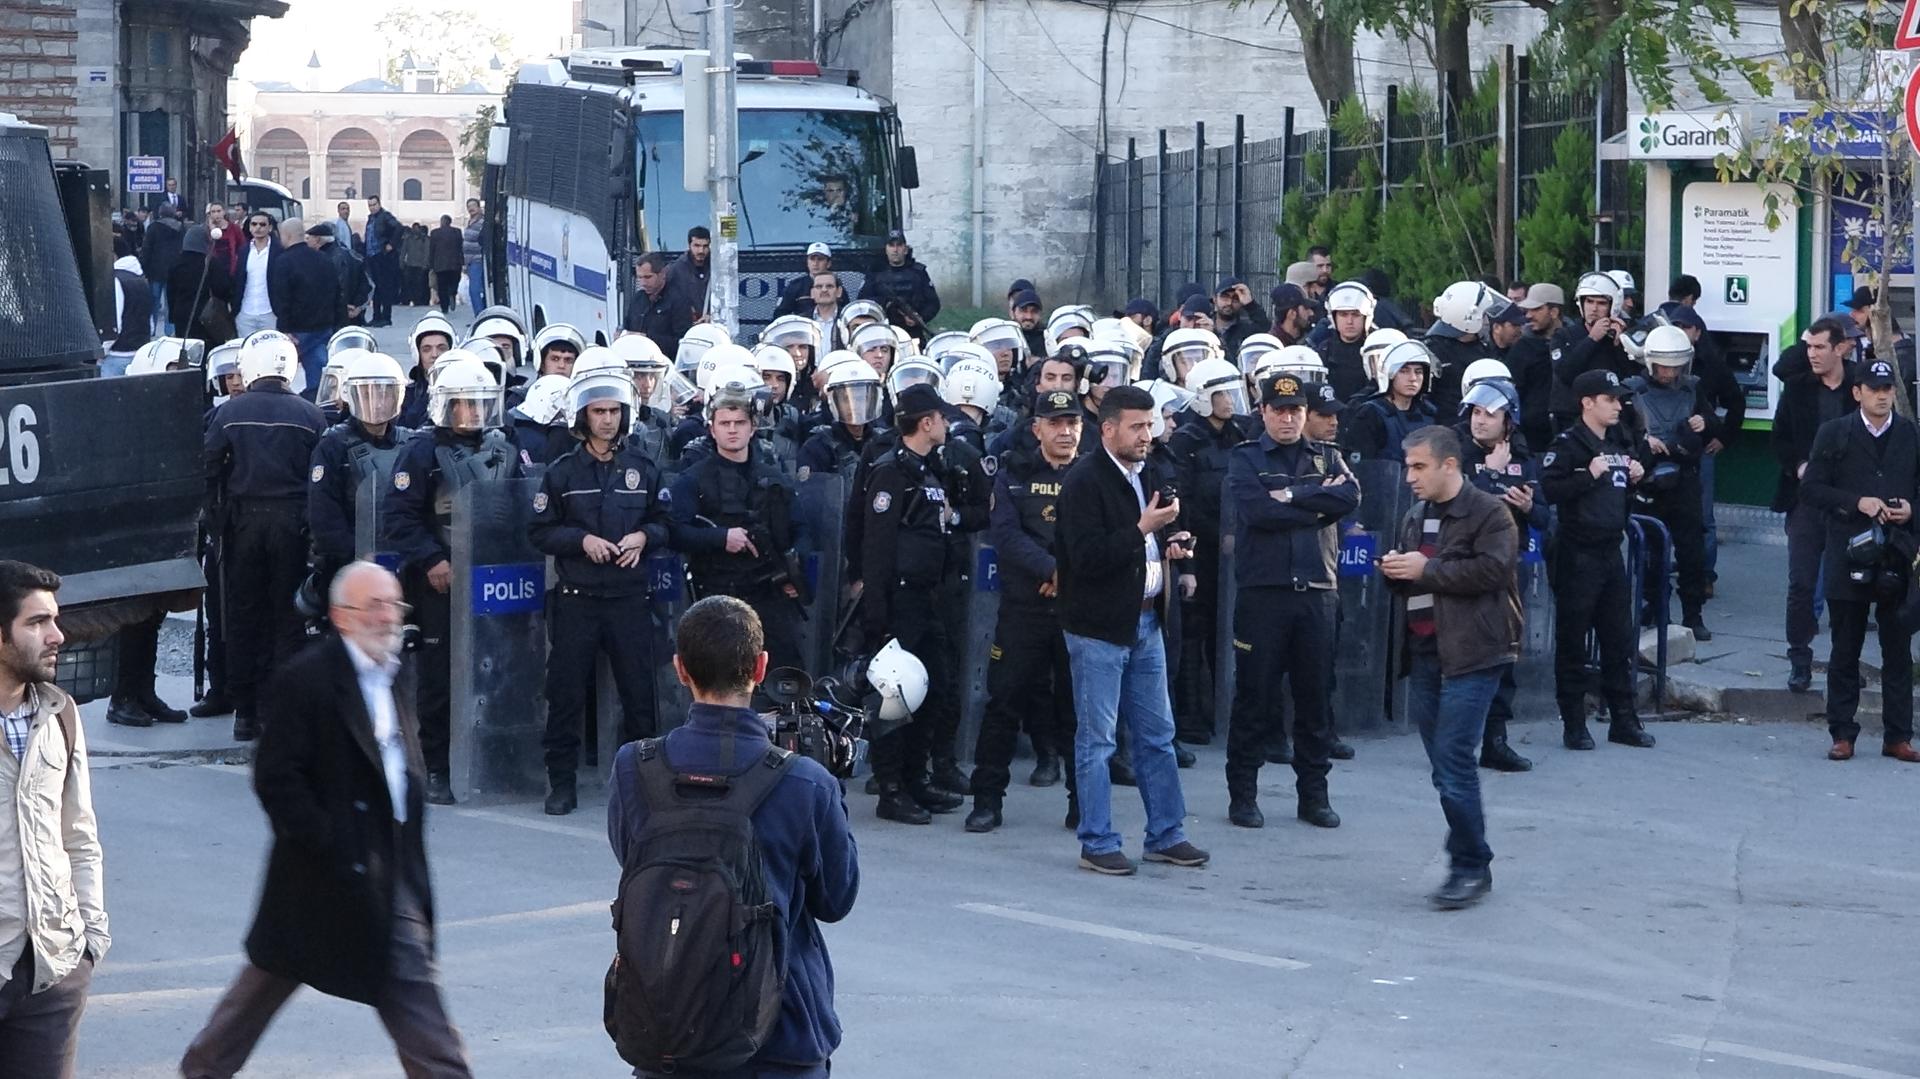 On the route of the marching protesters, riot police took their positions - but ultimately did not intervene.